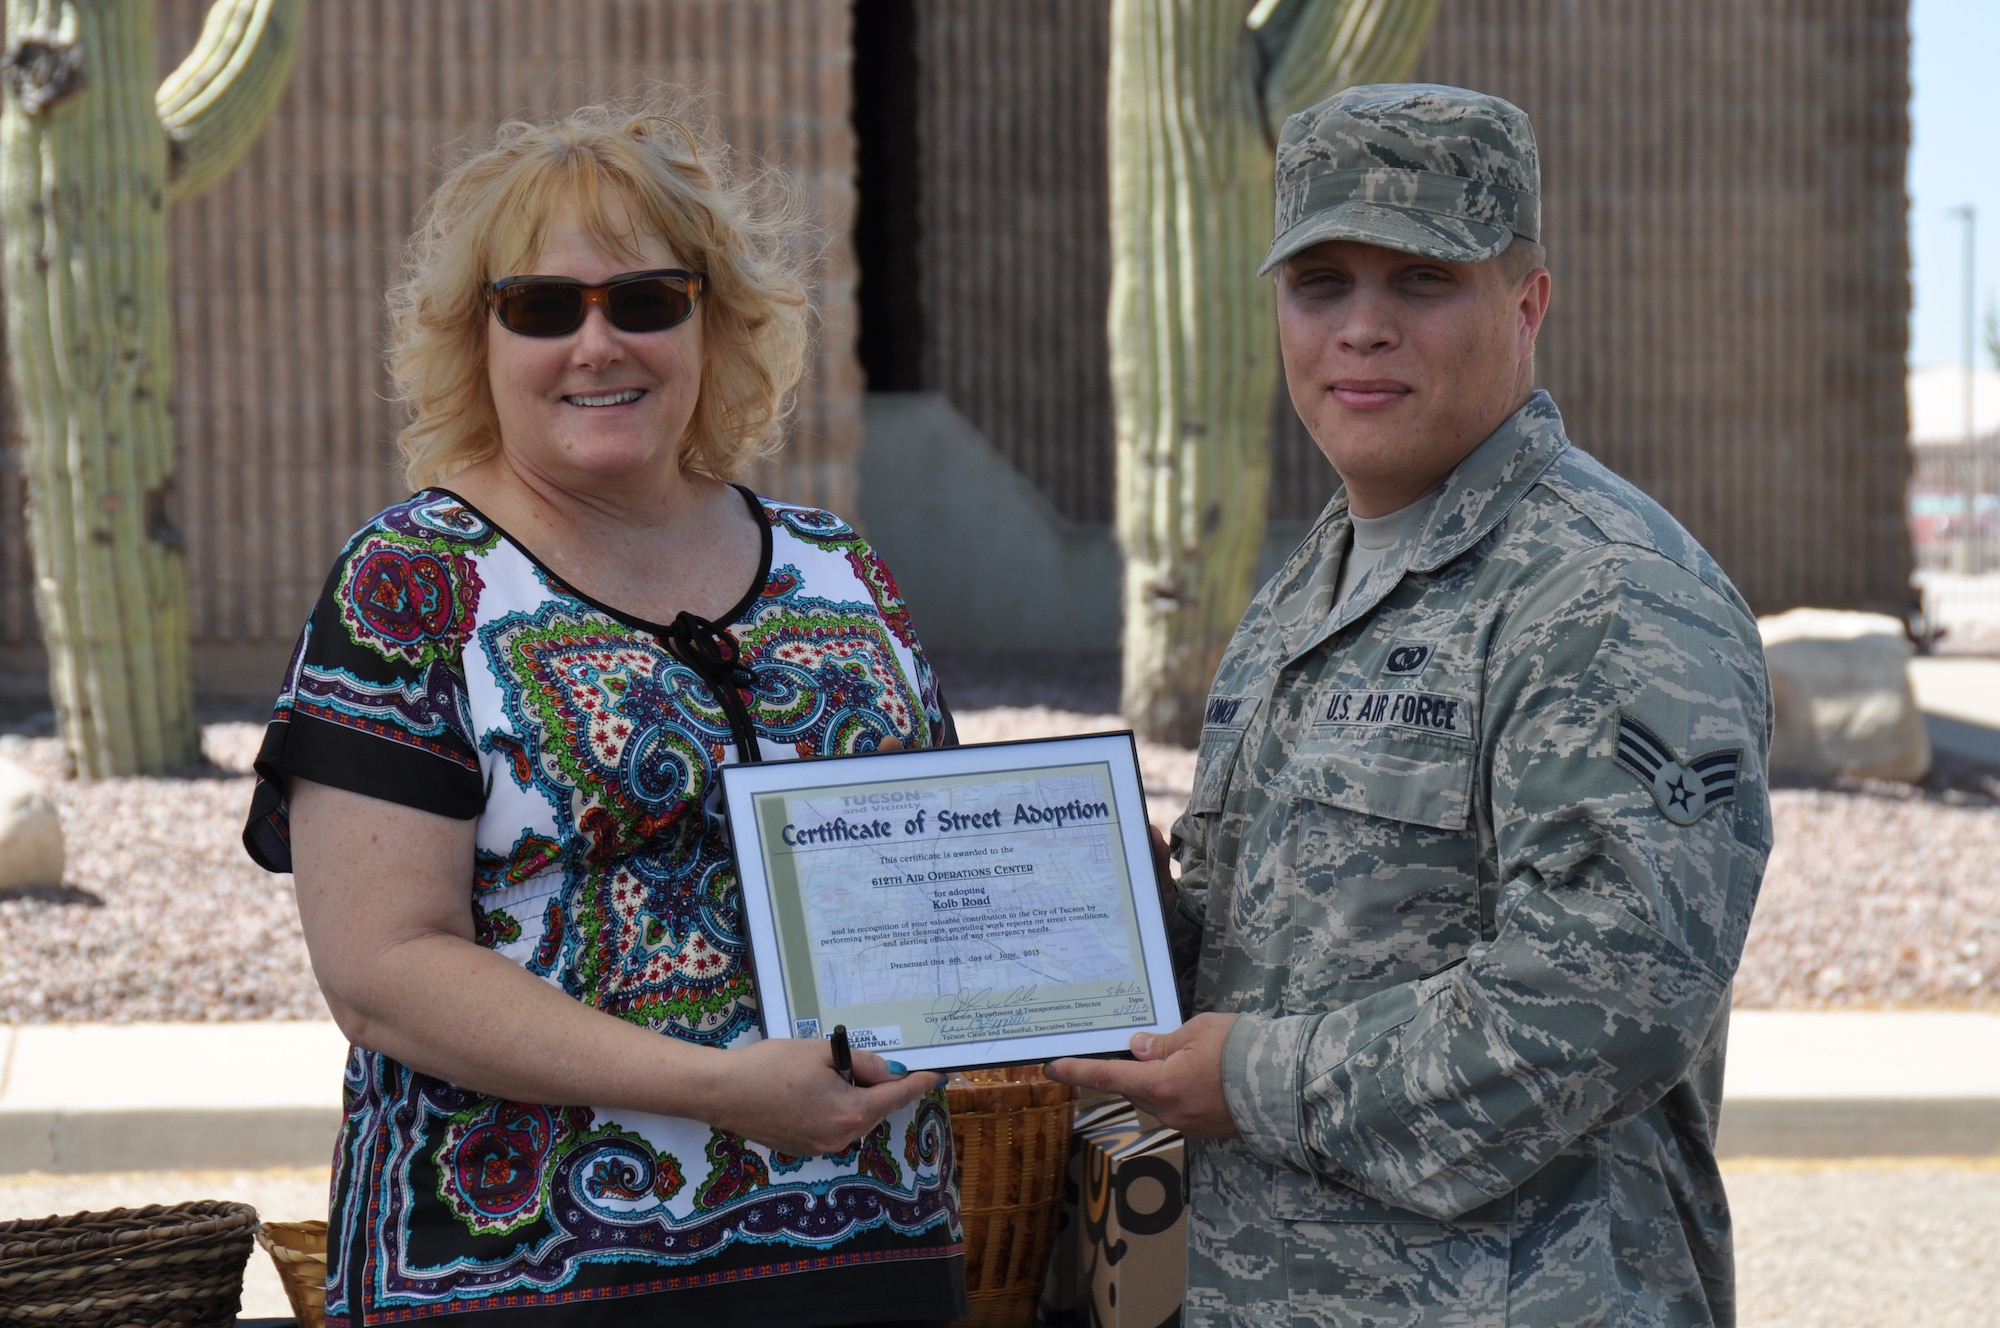 Jean Hickman, Adopt-a-Park coordinator for Tucson Clean & Beautiful, presents Senior Airman Benjamin Honken, 612th Air and Space Operations Center, with a certificate of recognition during a ceremony recognizing his units’ contributions to Tucson’s Adopt-a-Street program, June 6. (USAF photo by Master Sgt. Kelly Ogden/Released)